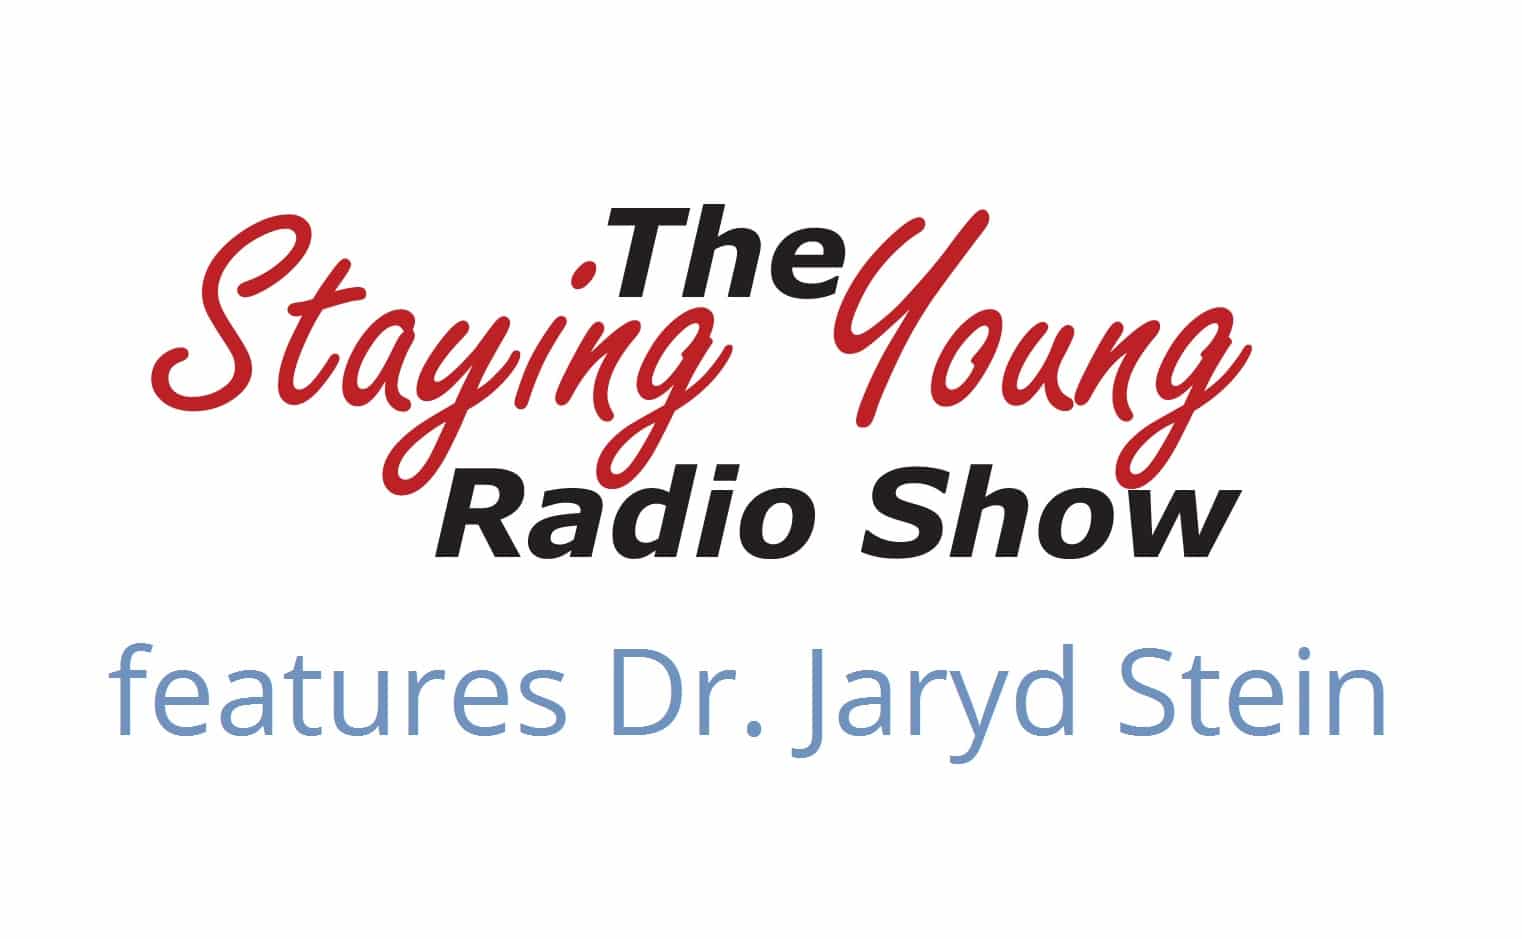 Dr. Jaryd Stein Featured on Radio Show for Peripheral Vascular Disease